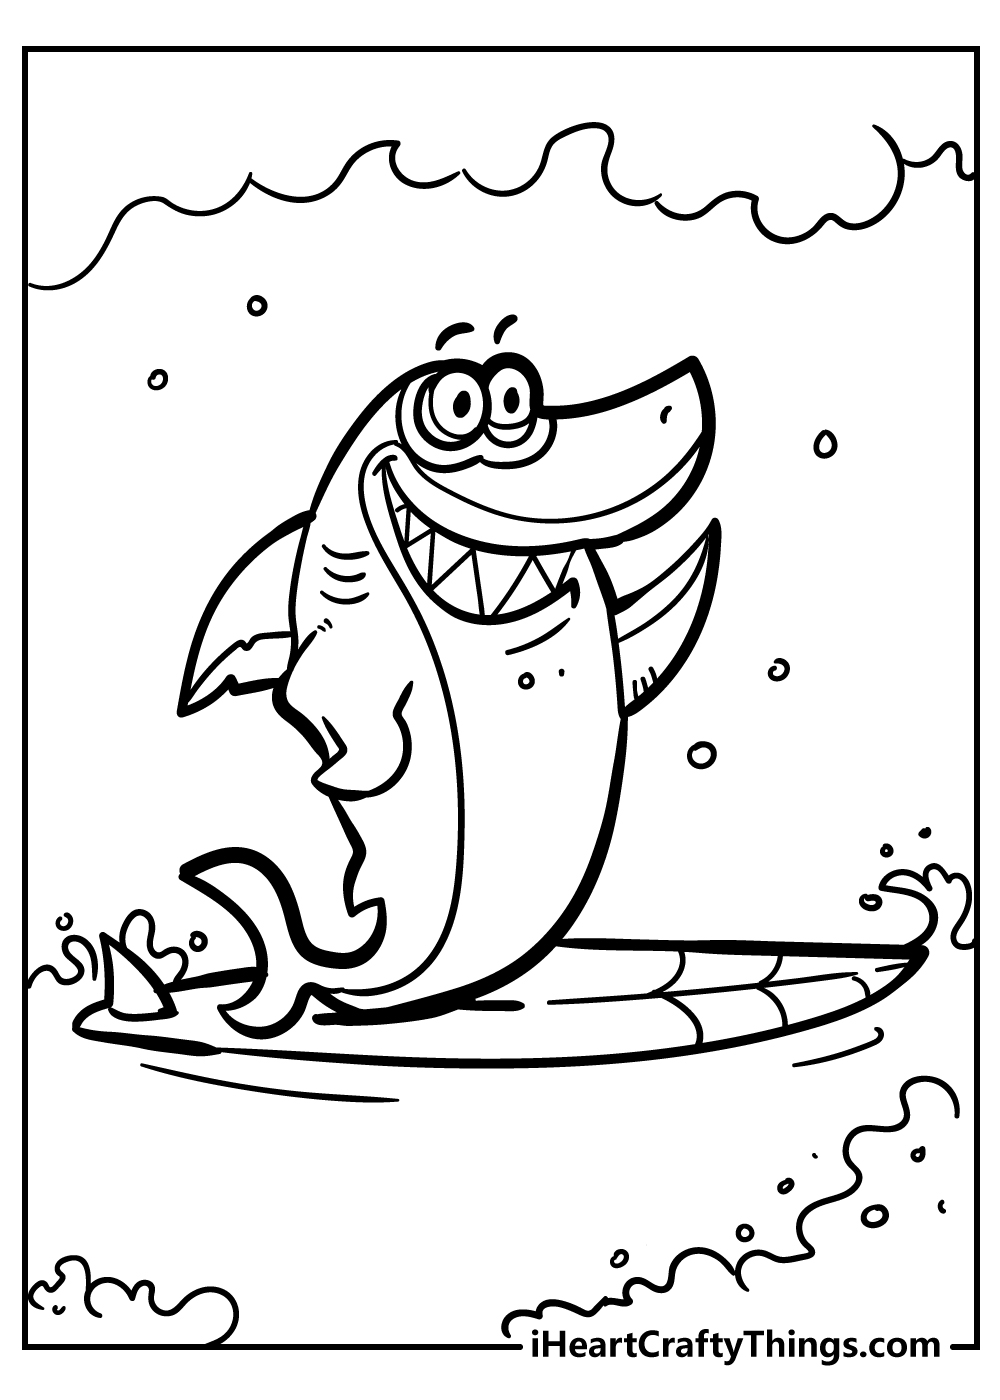 Shark coloring pages for adults free printable